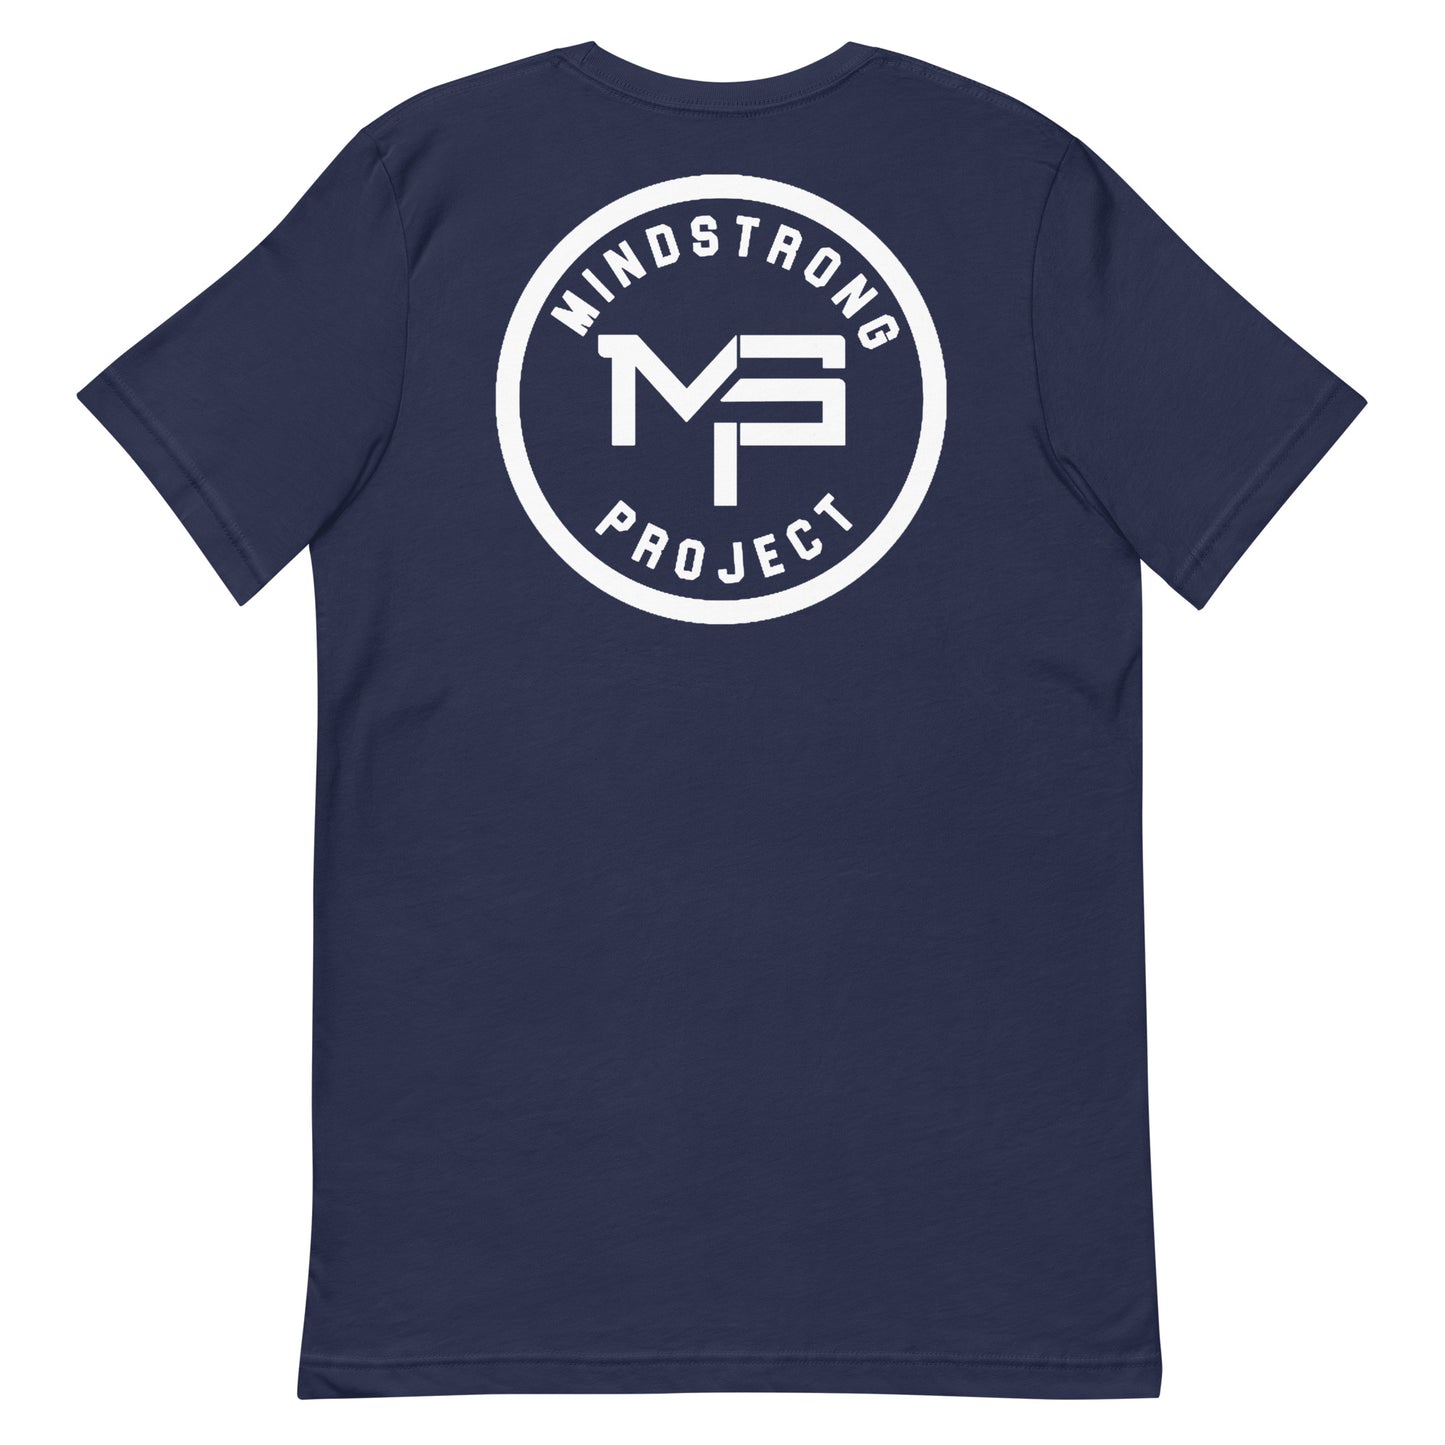 THE MINDSTRONG PROJECT BREATHE LESS T-SHIRT (MORE COLORS)